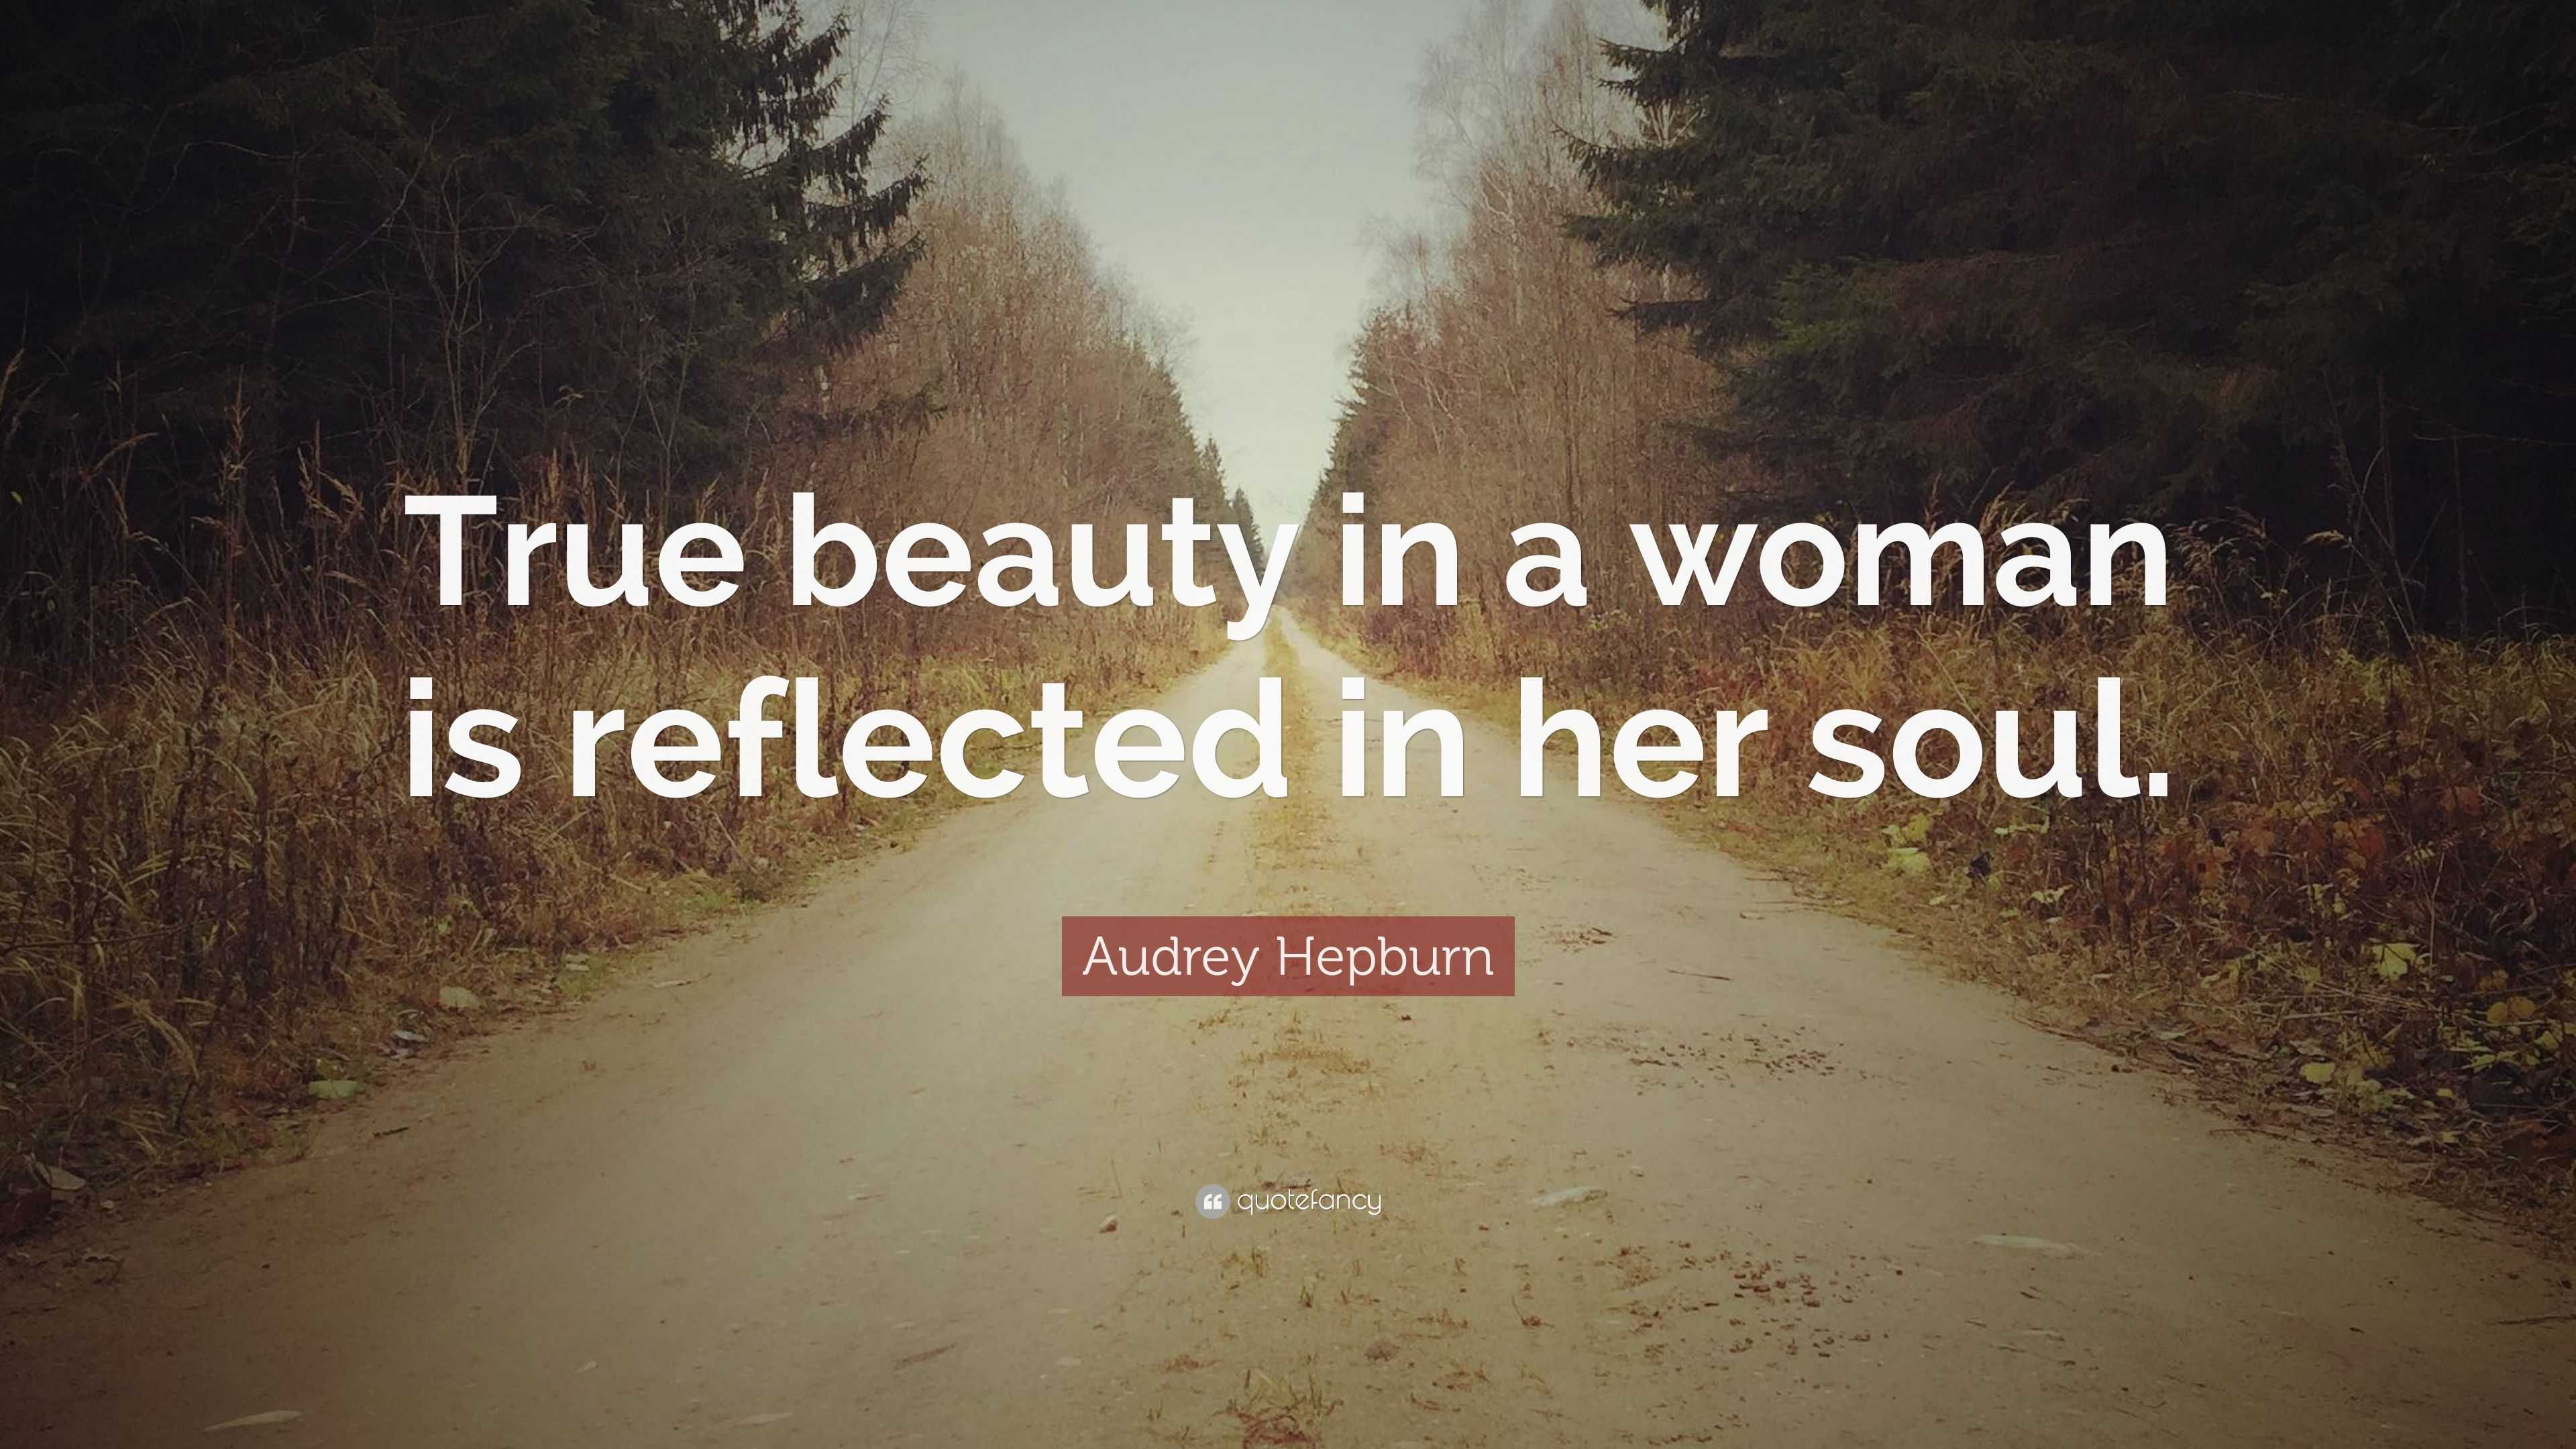 Audrey Hepburn quote: True beauty in a woman is reflected in her soul.